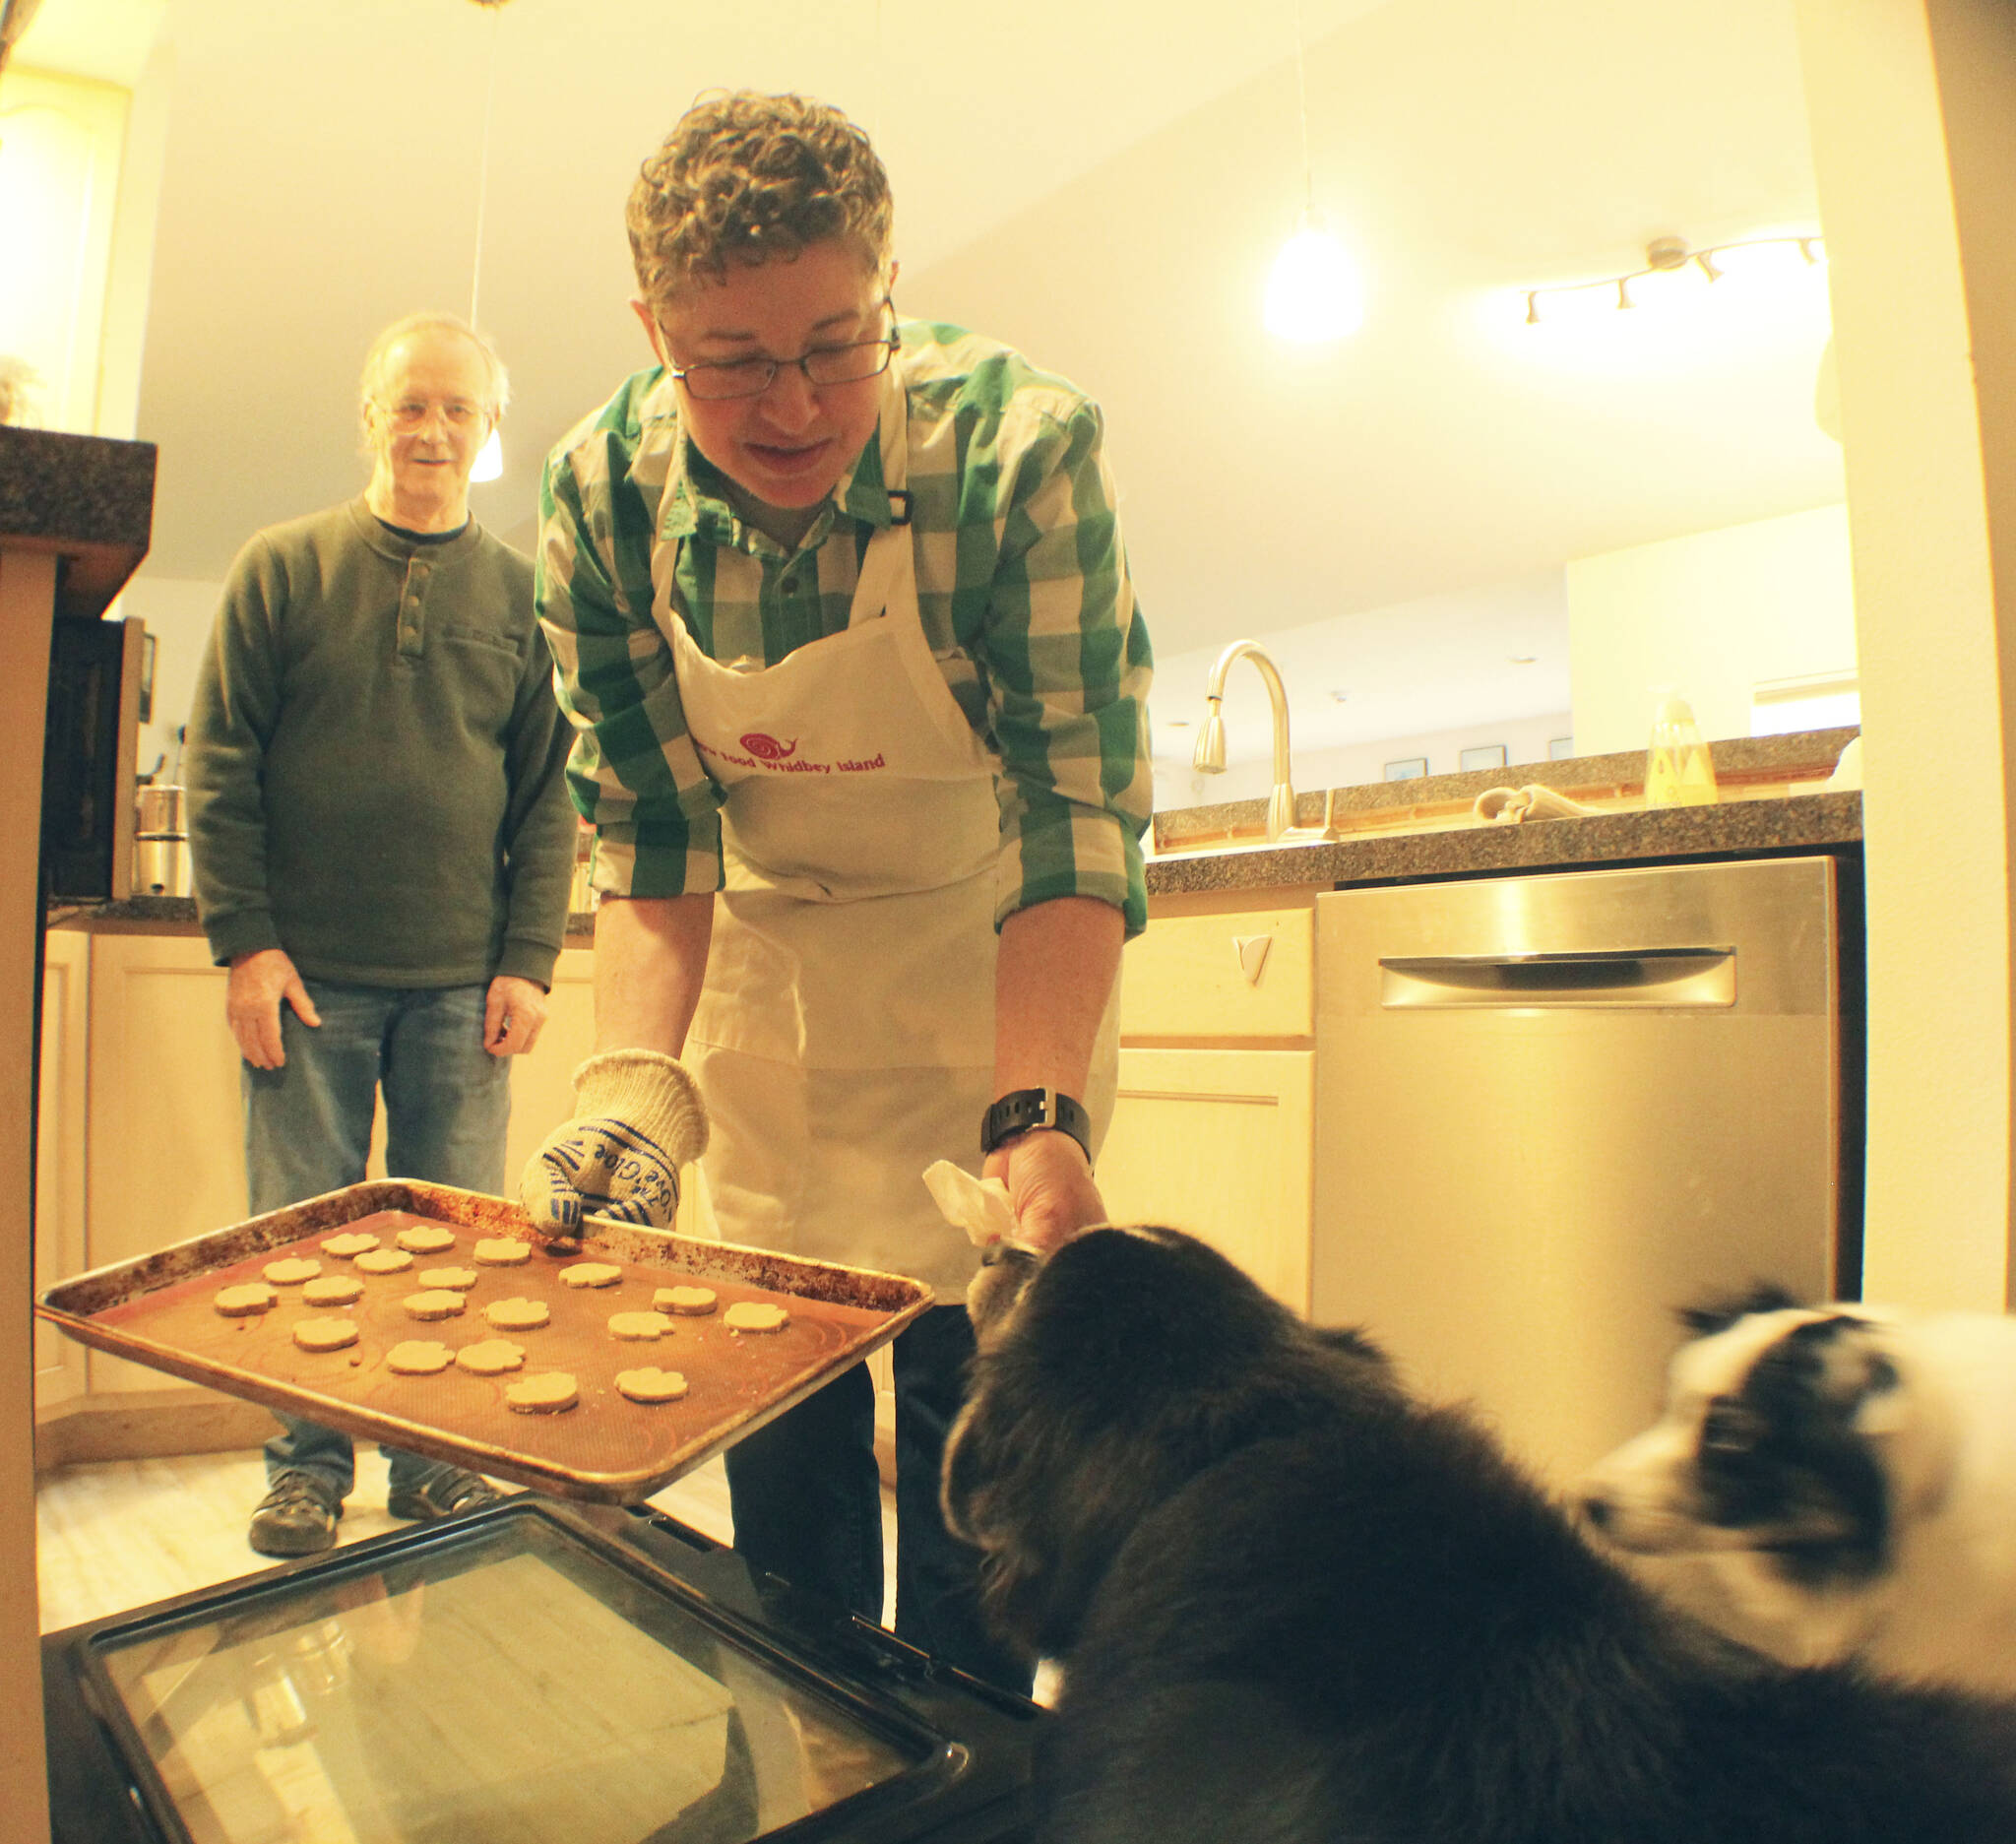 Photo by Karina Andrew/Whidbey News-Times
Arjai Allred puts some homemade dog treats in the oven to bake.